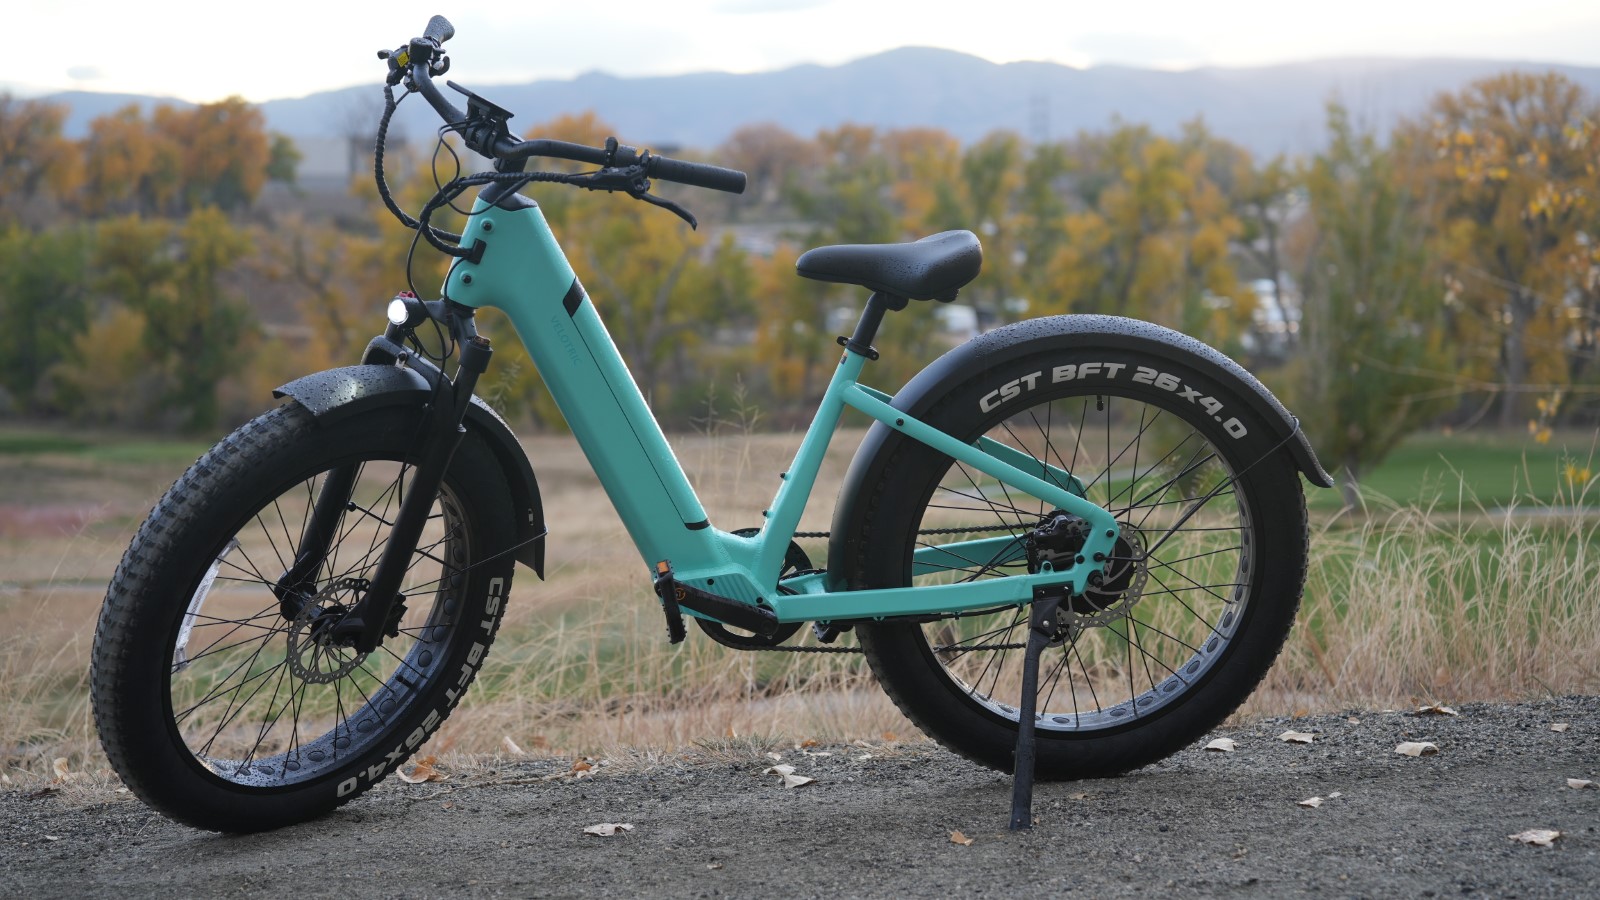 What Is An Ebike? What Is A Pedal Electric Bicycle?